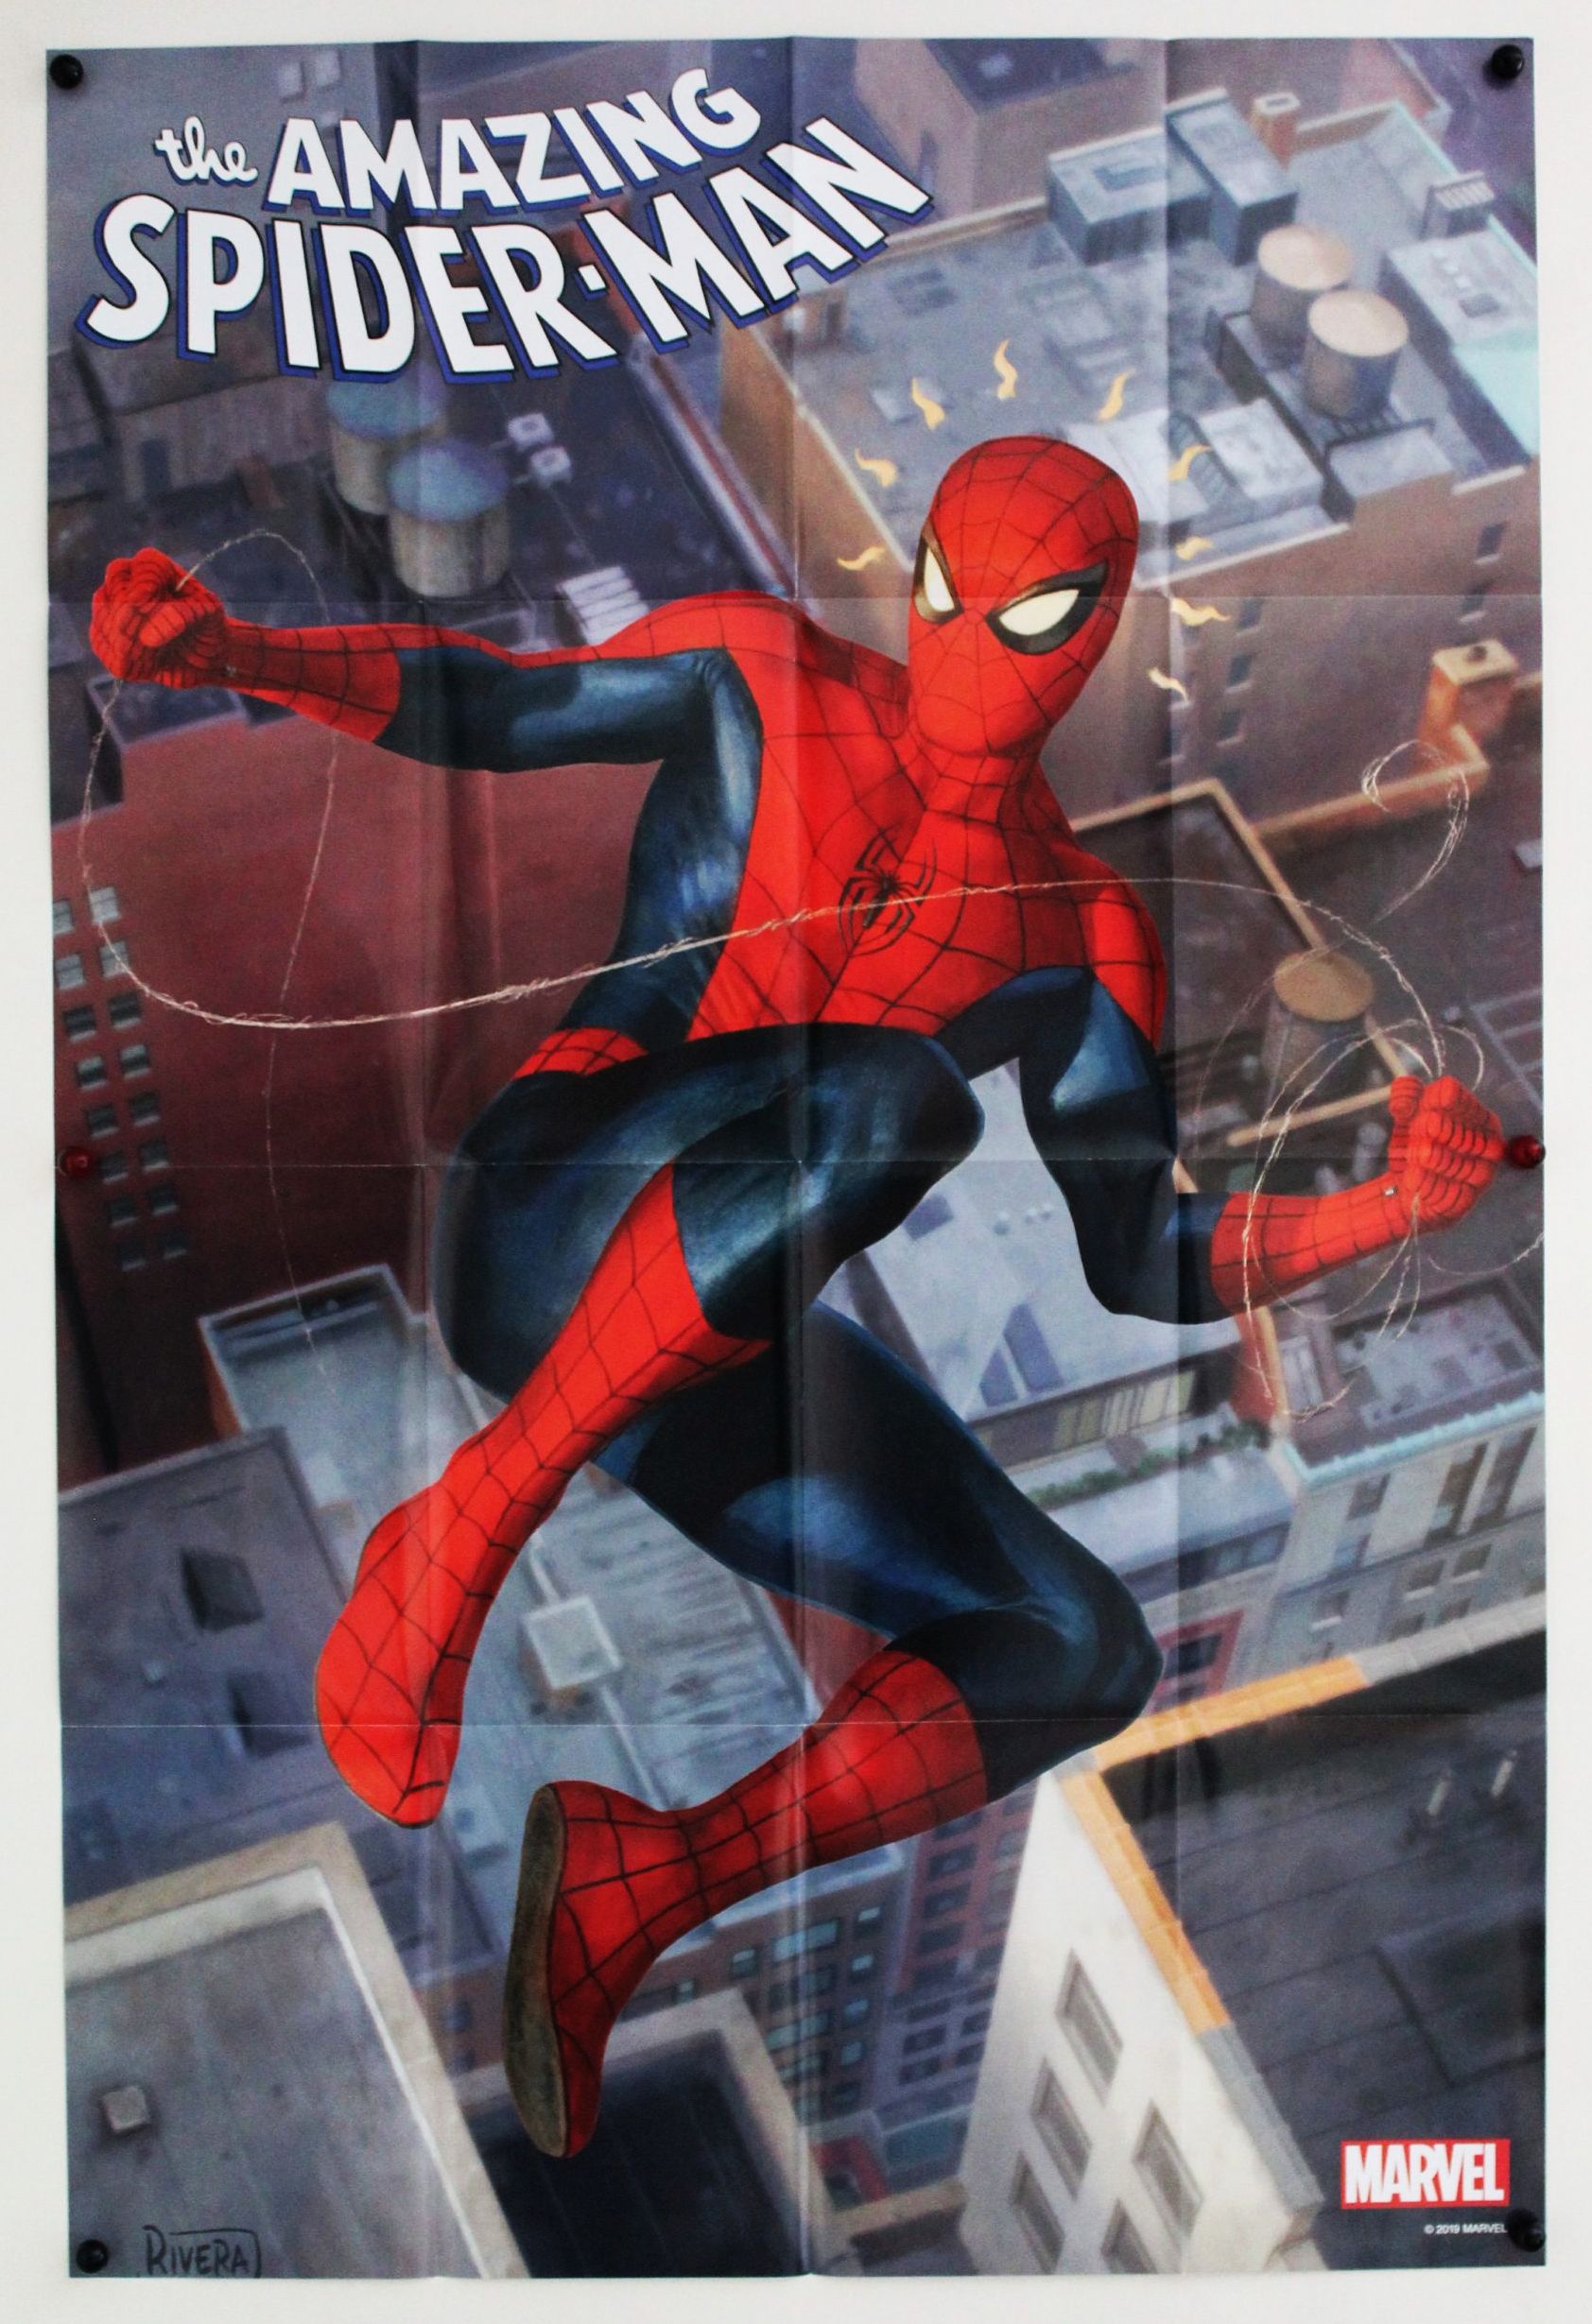 Details about   The Amazing Spider-man #50 Cover Poster Multiple Sizes and Papers 11x17-24x36 